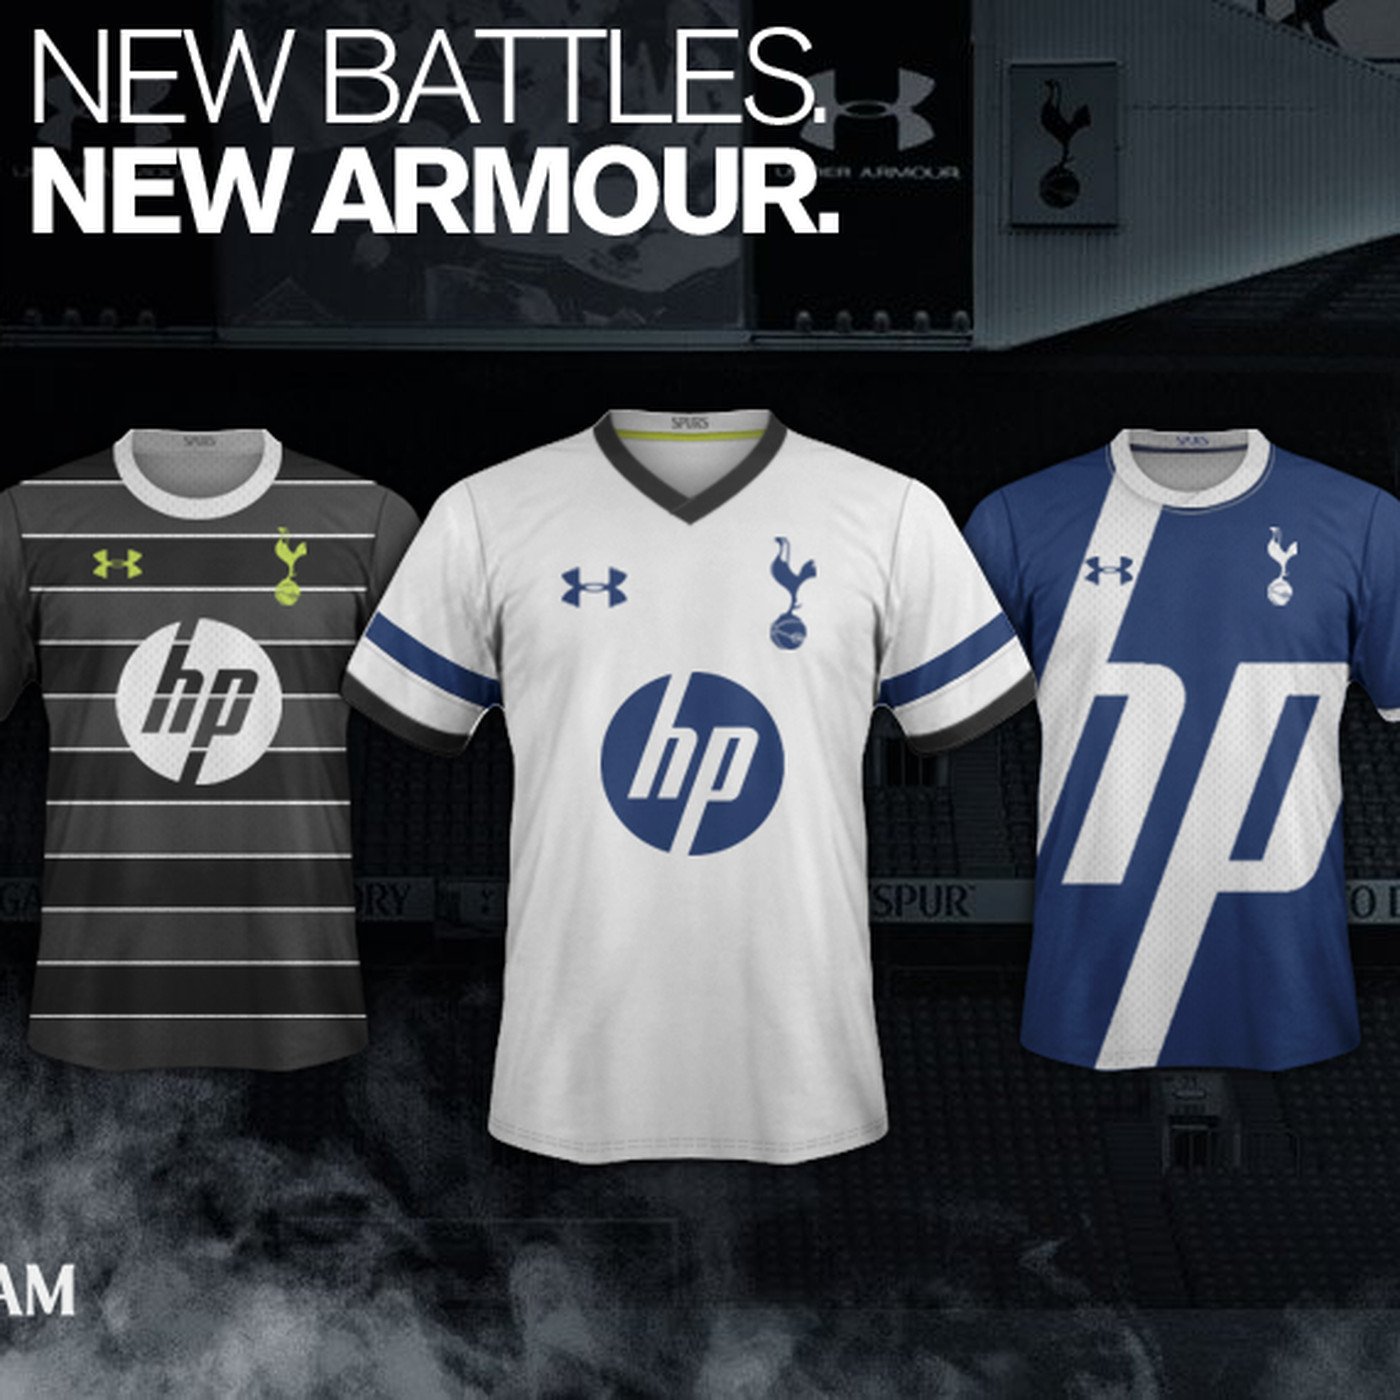 Rumored leaked Hotspur kits for - Cartilage Free Captain